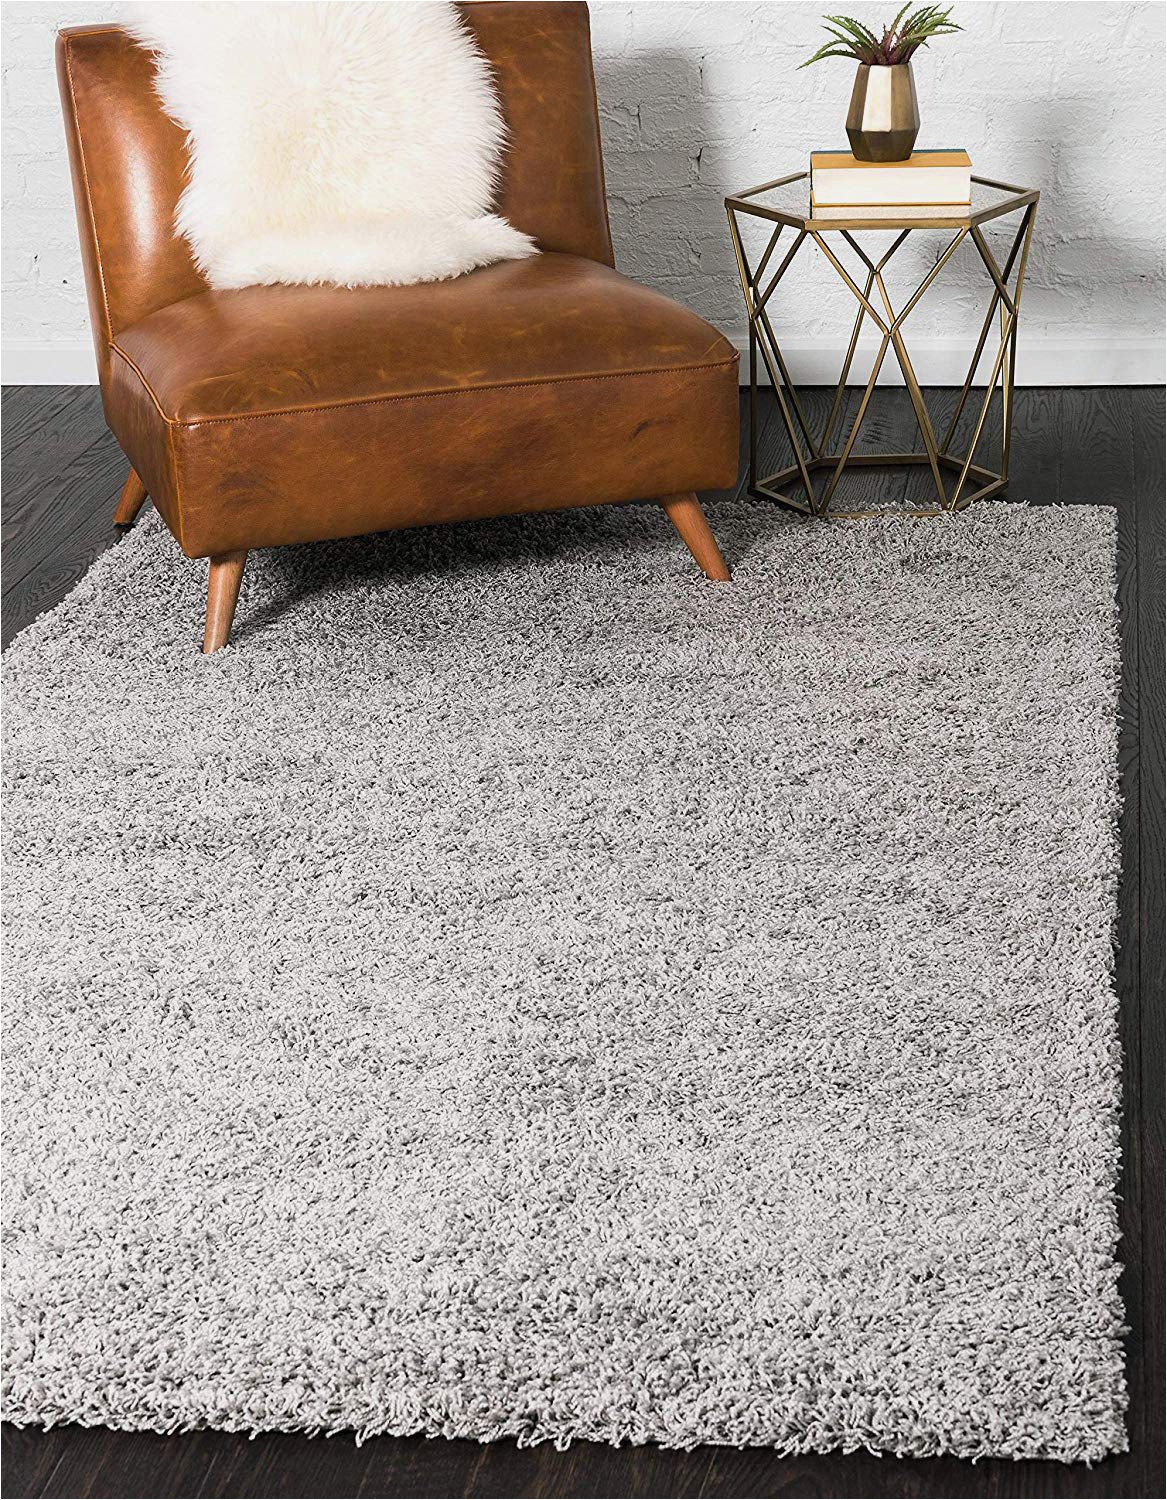 9×12 area Rugs Under $150 11 Best area Rugs Under $200 2018 the Strategist